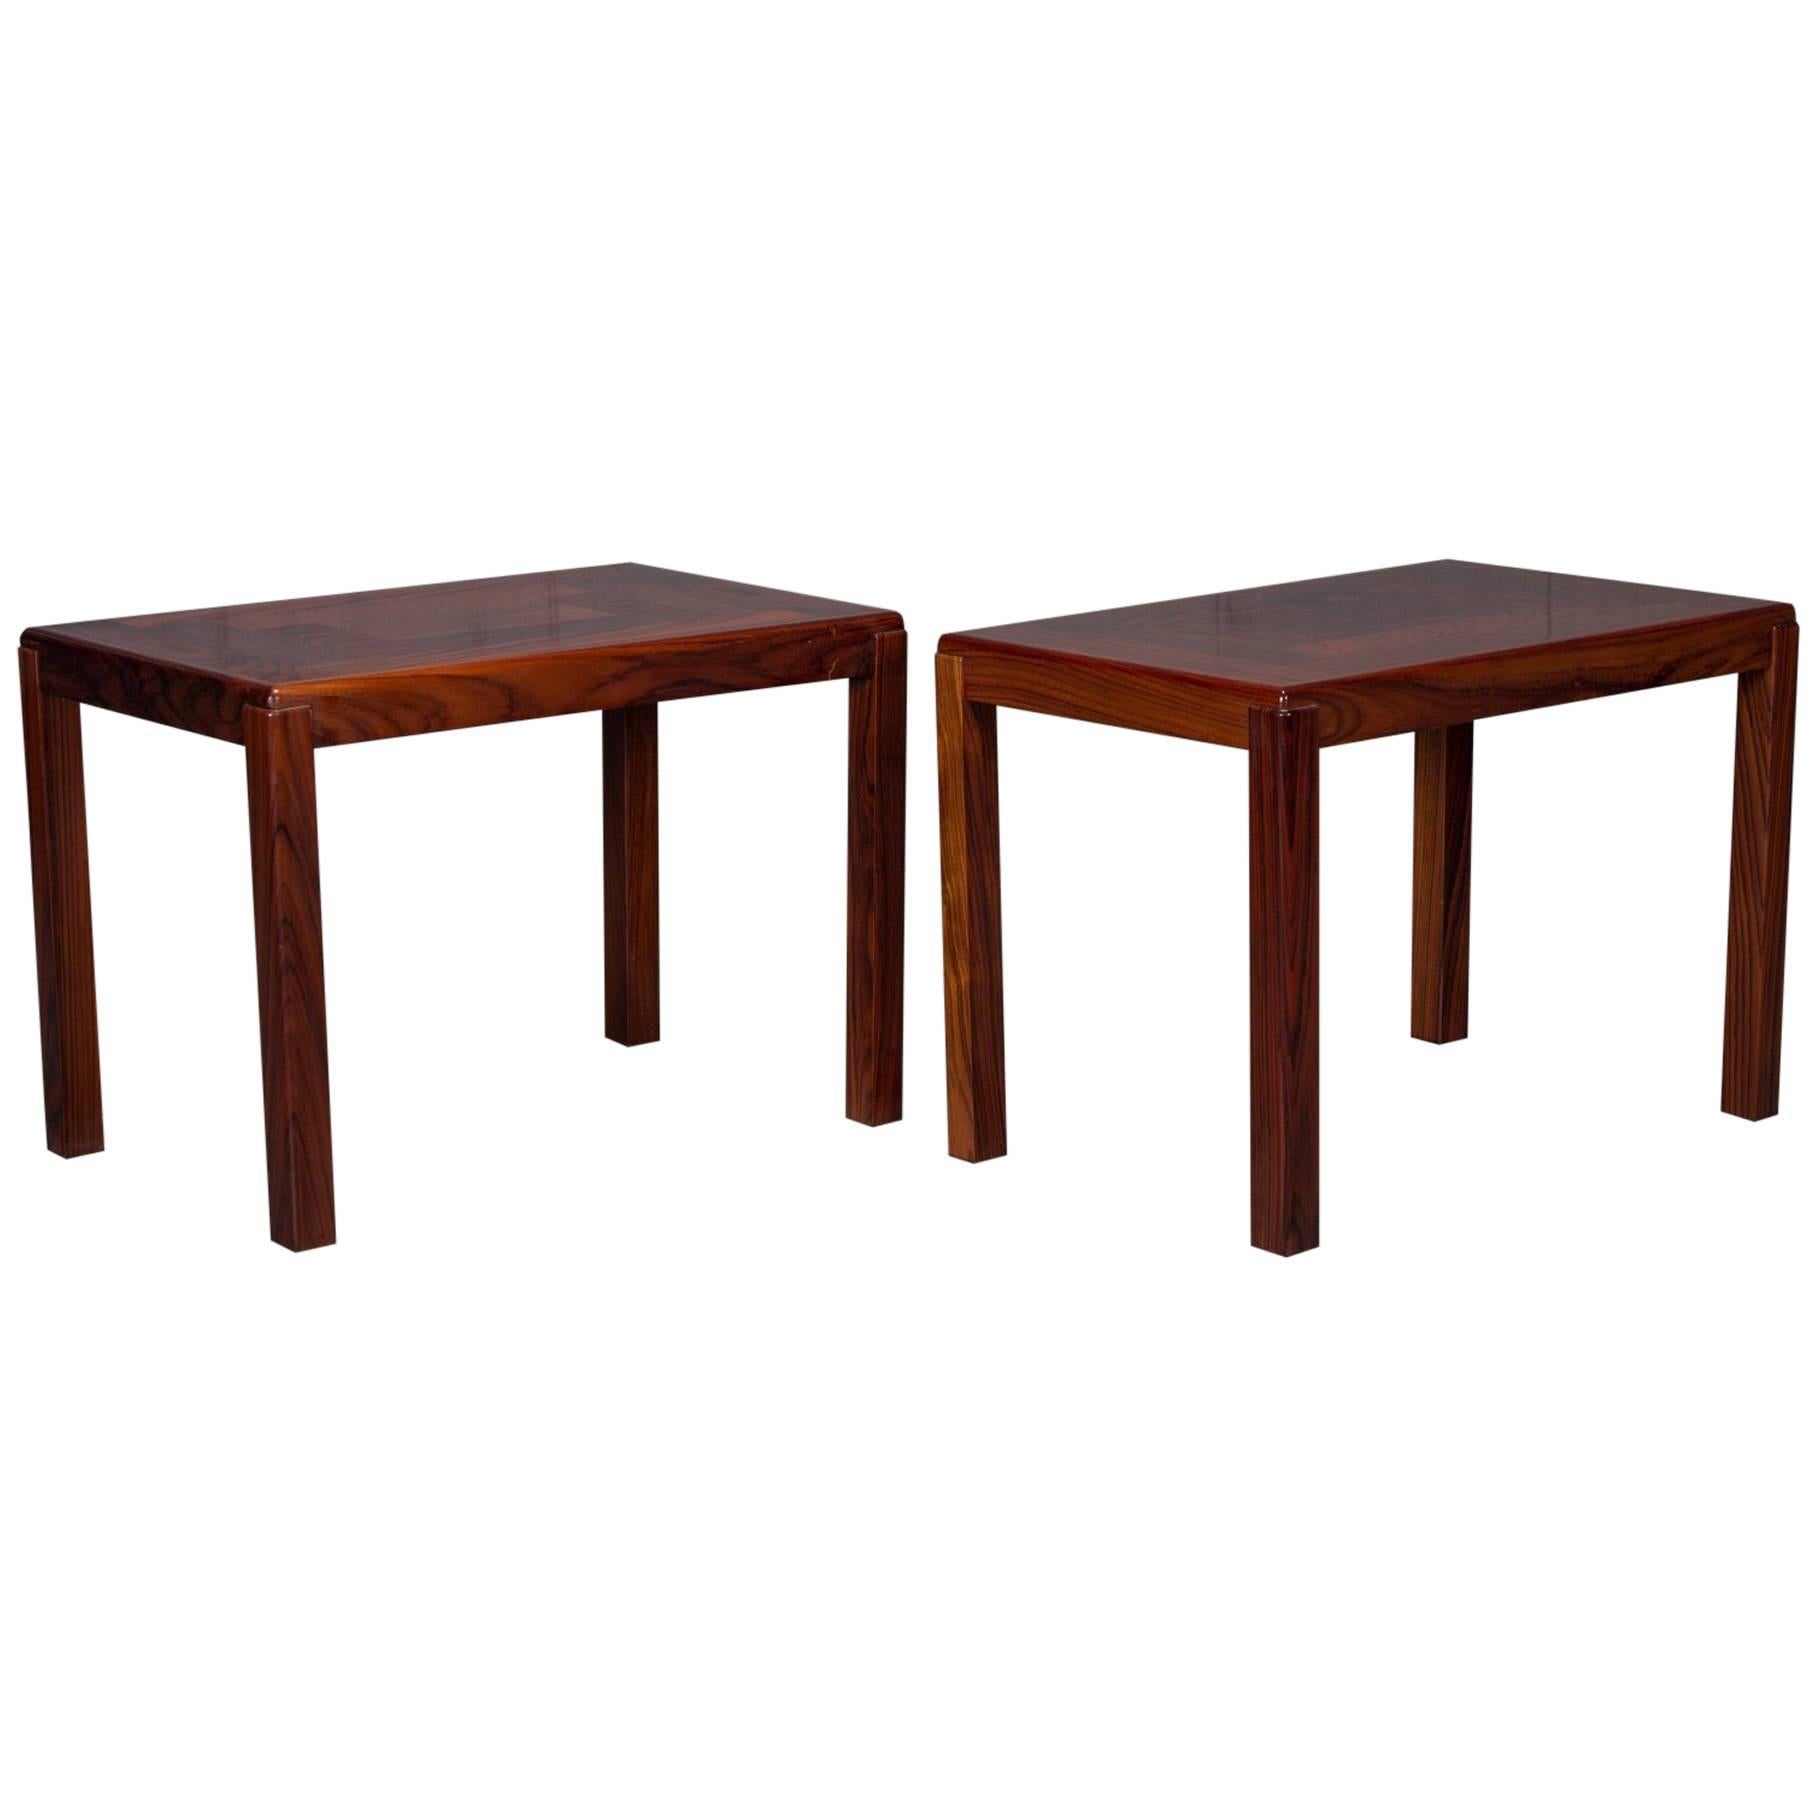 Pair of Danish Modern Rosewood Side Tables